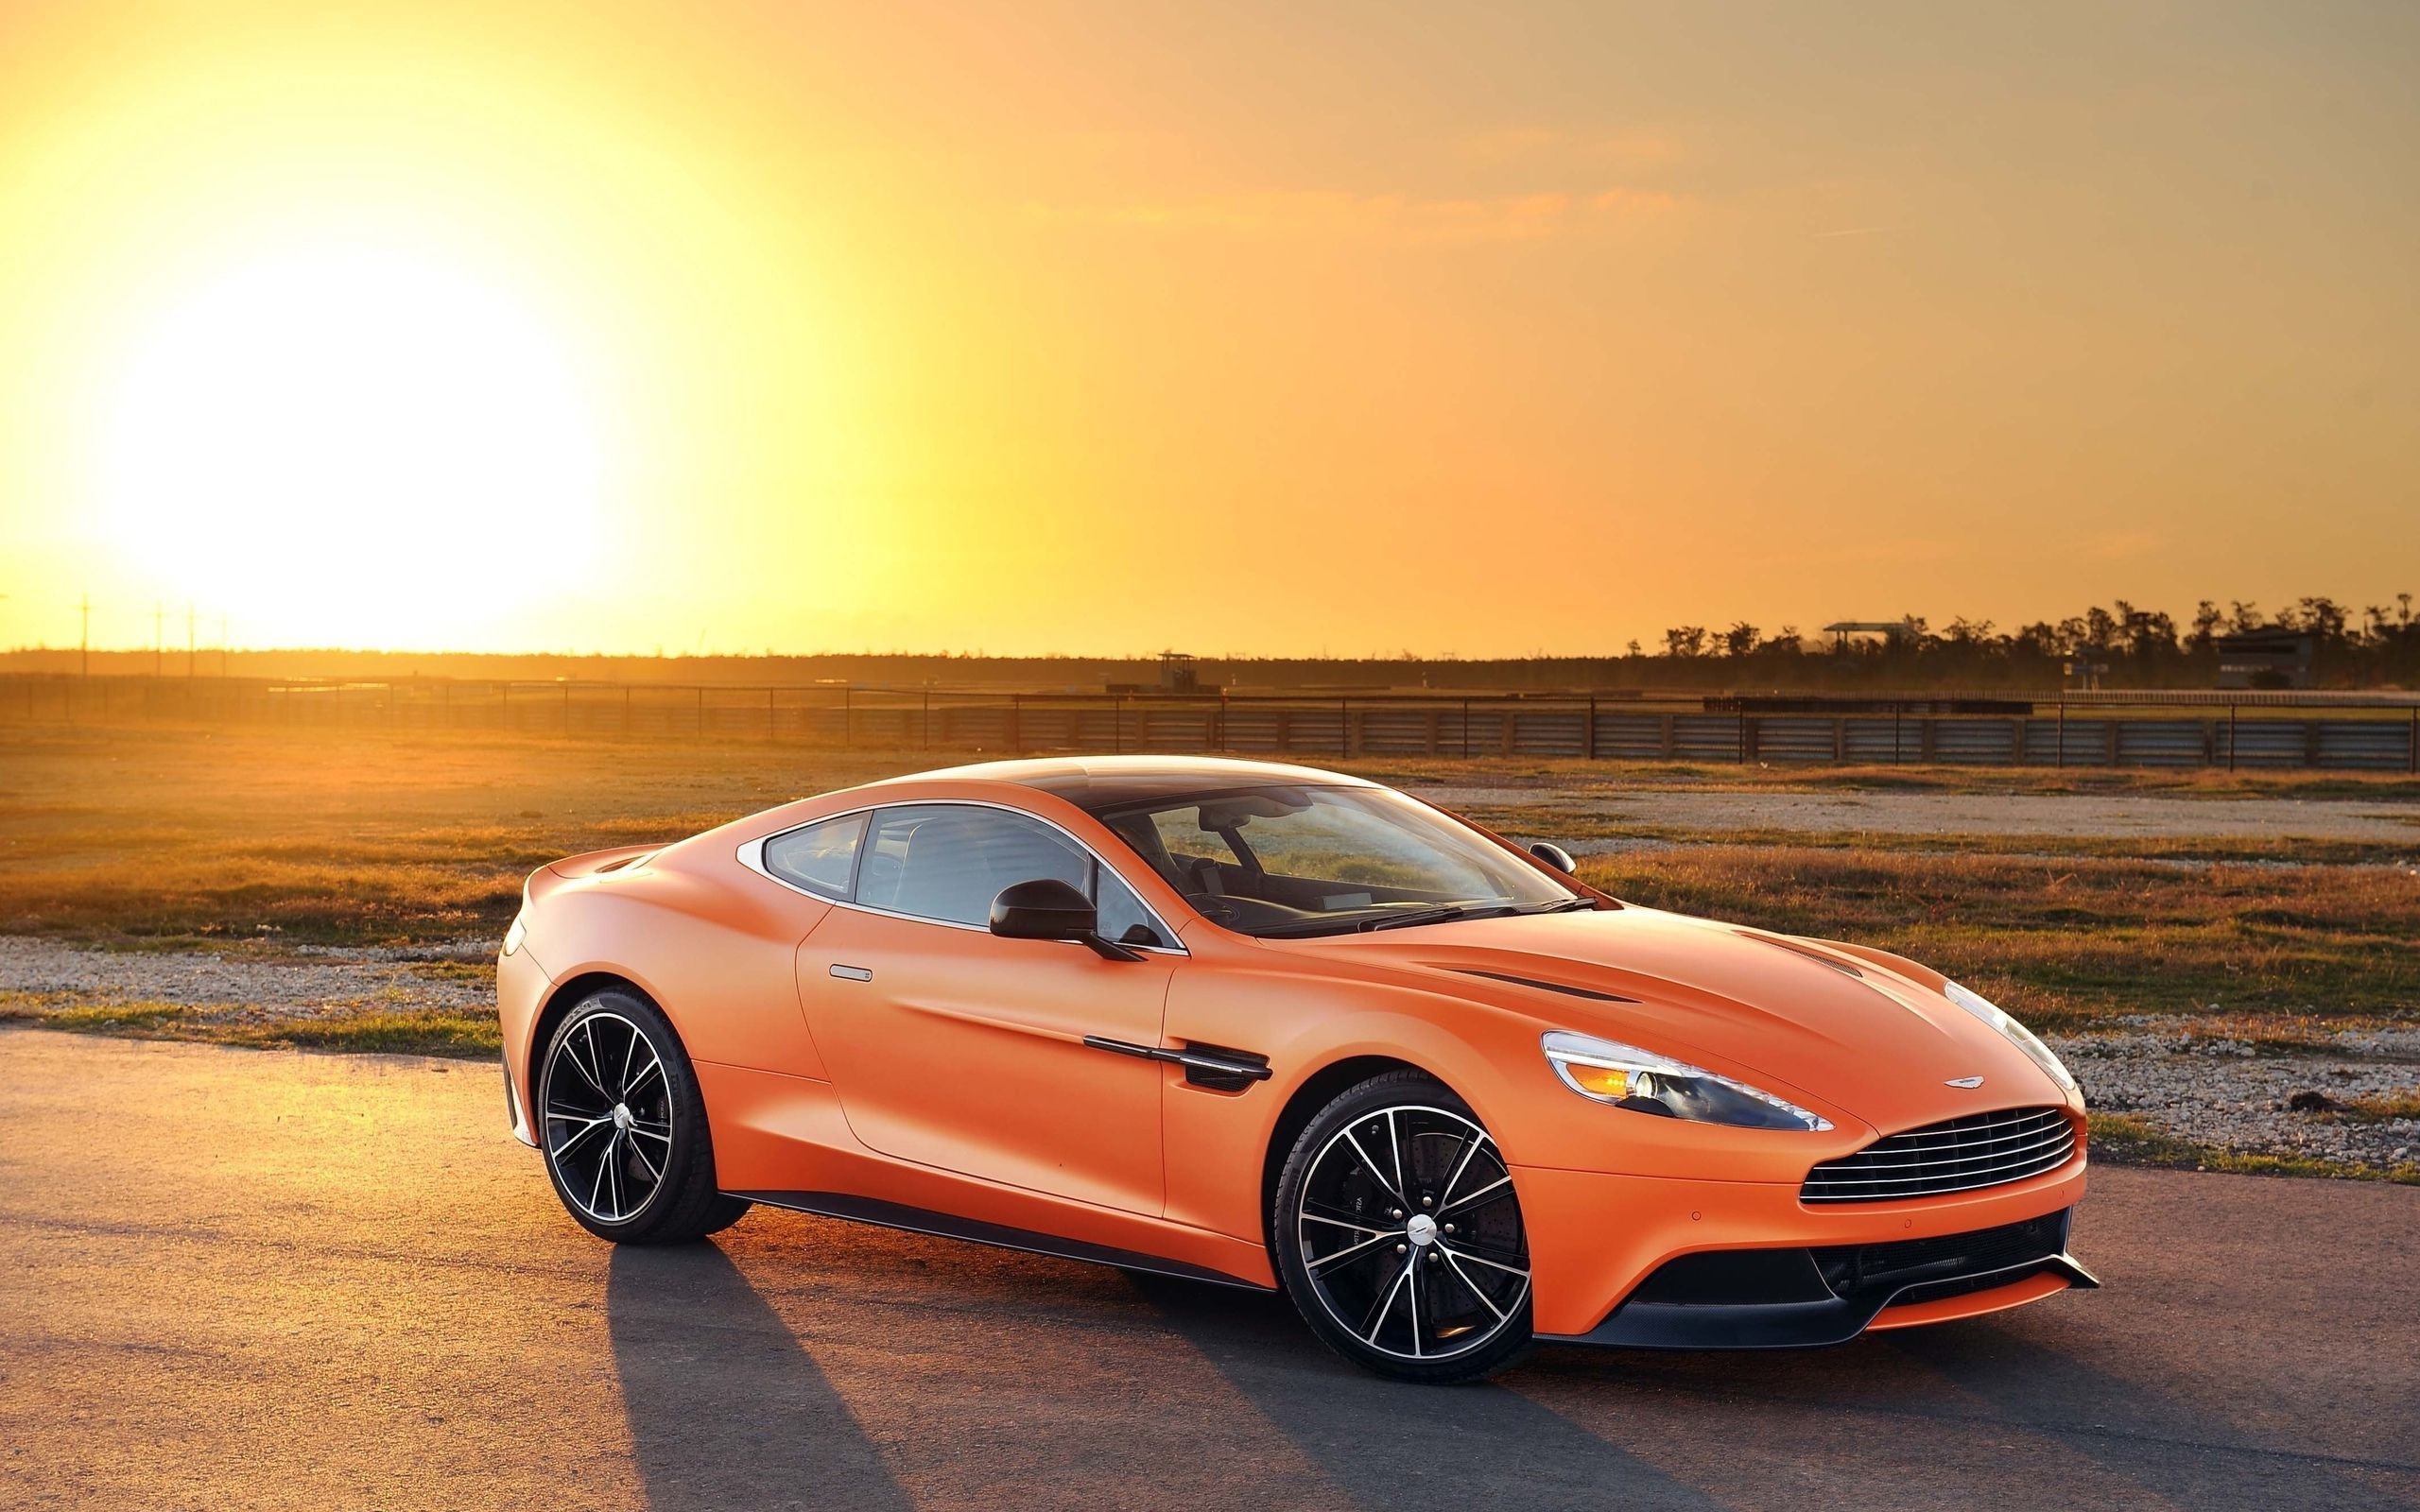 2560x1600 Aston Martin Vanquish Wallpaper For Android